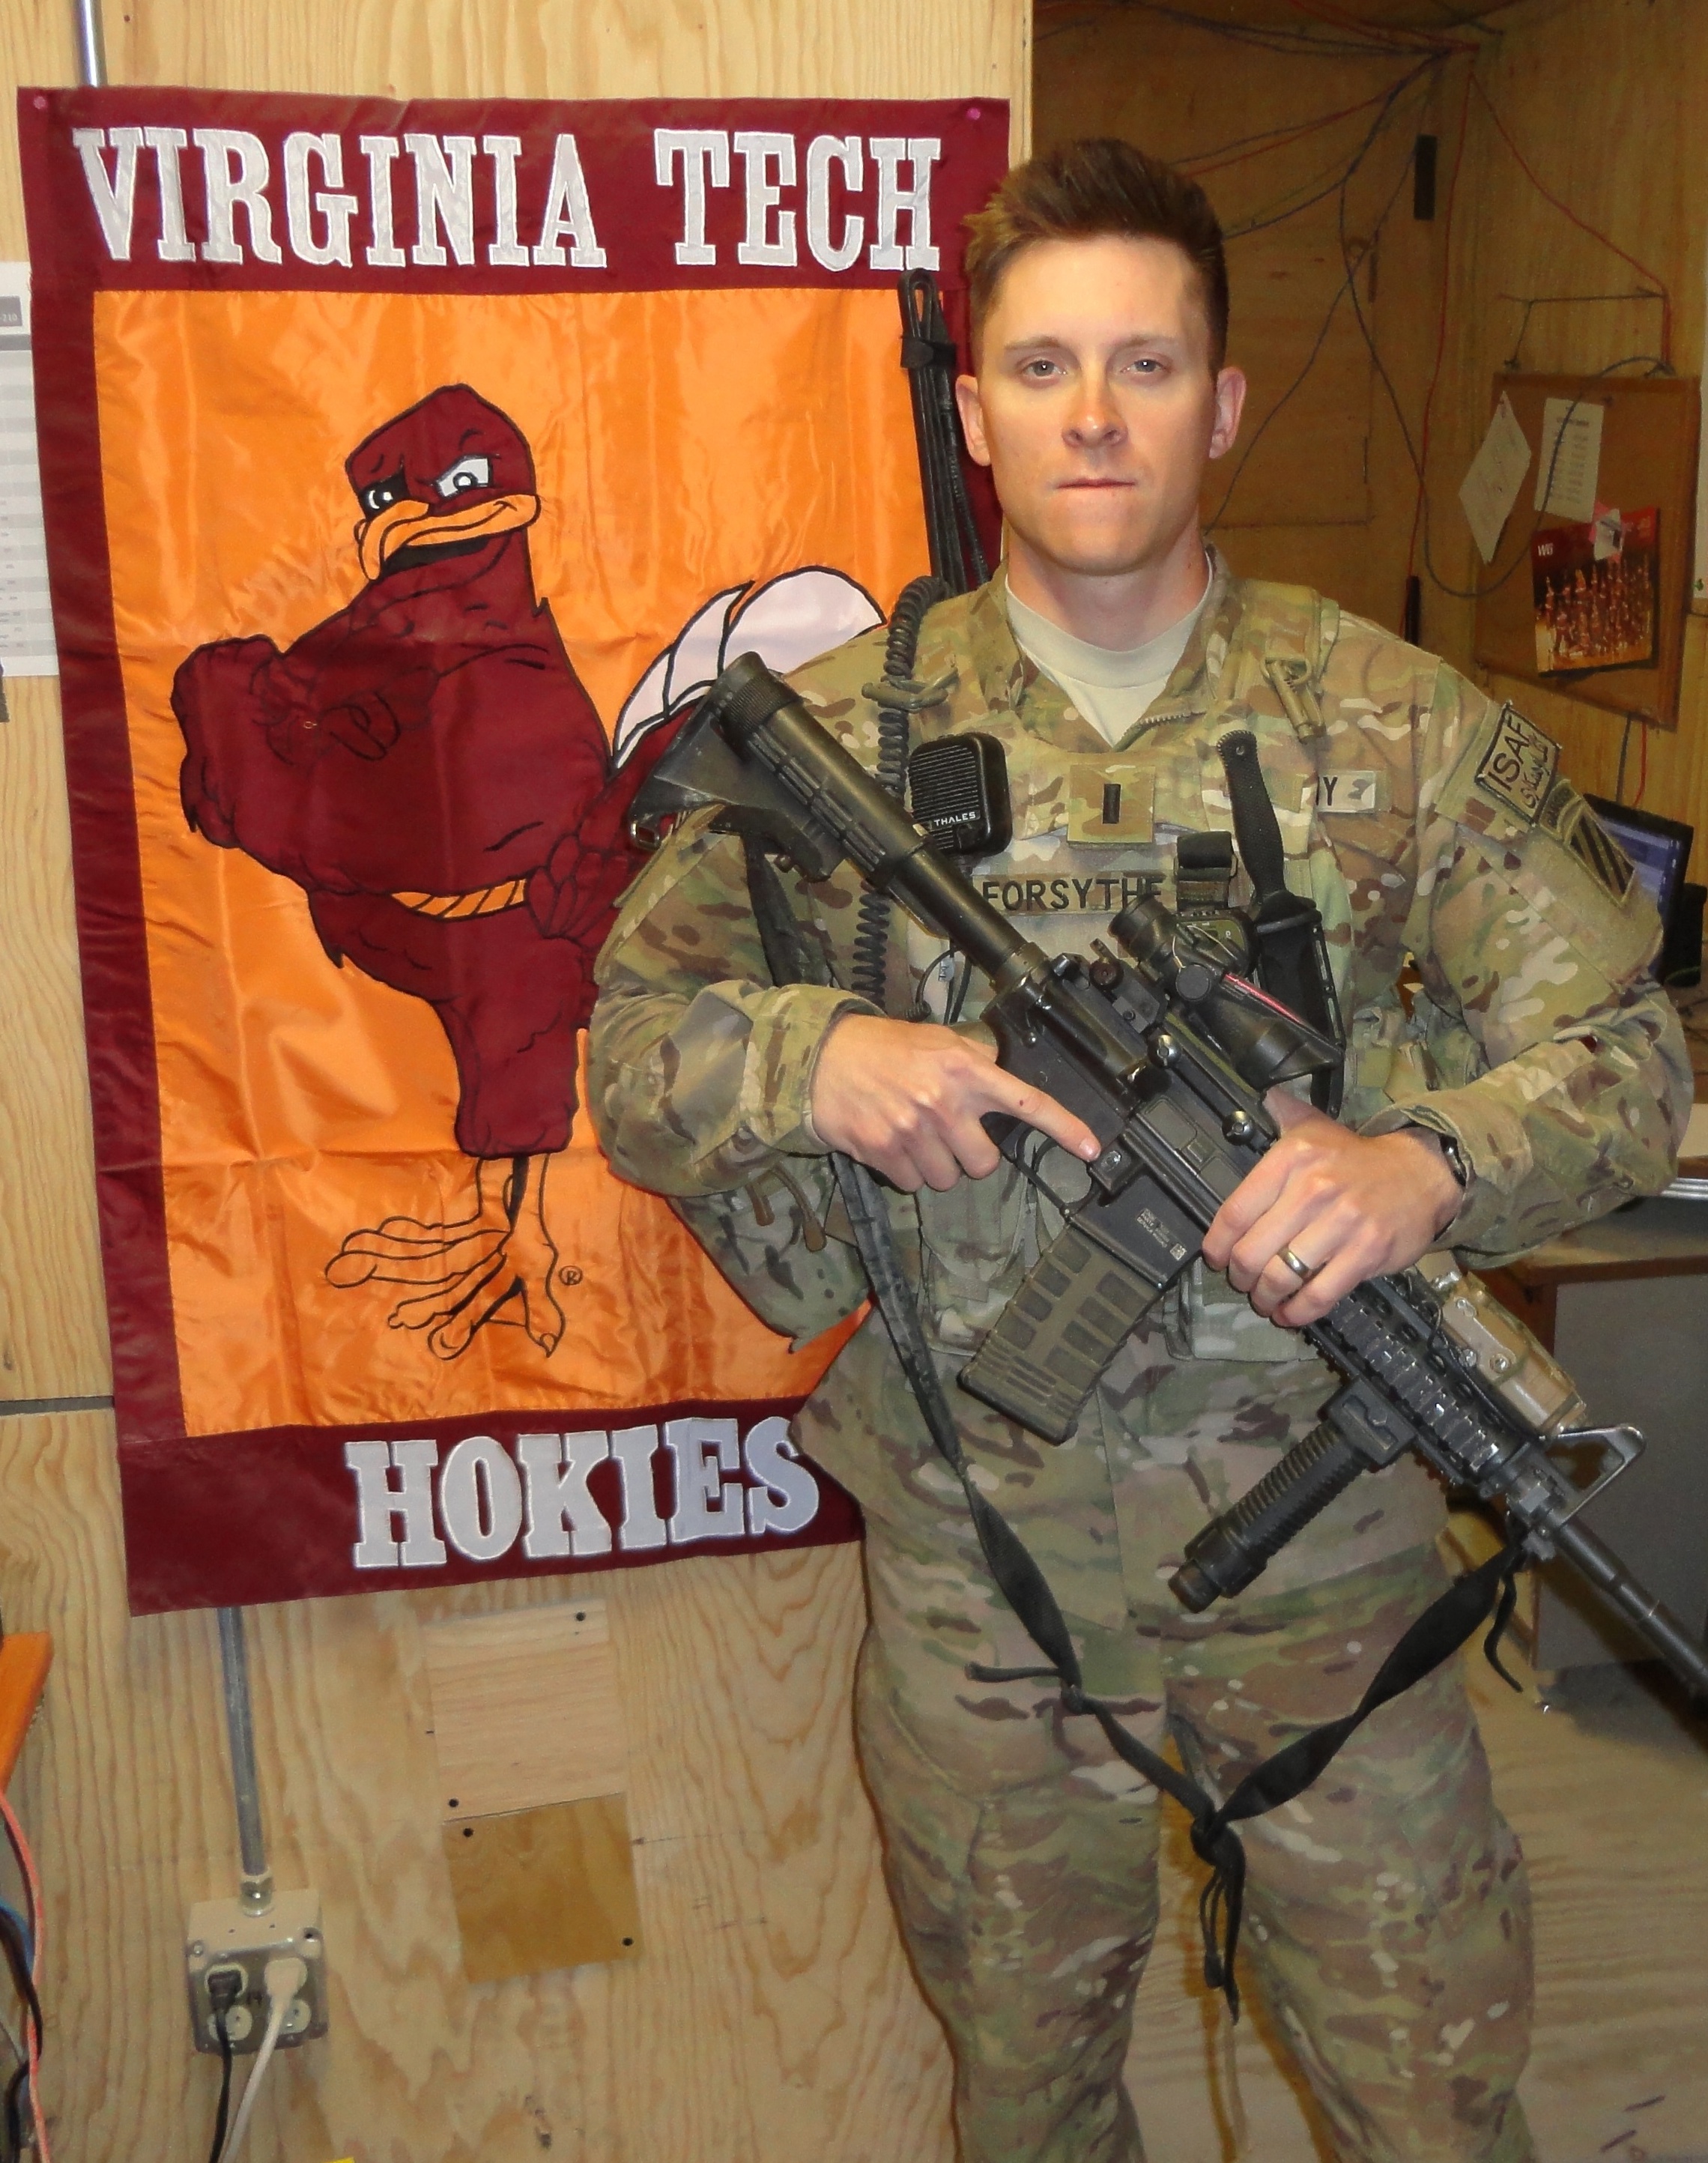 1st Lt. Scott Forsythe, U.S. Army, Virginia Tech Corps of Cadets Class of 2011 at his deployed location in Afghanistan